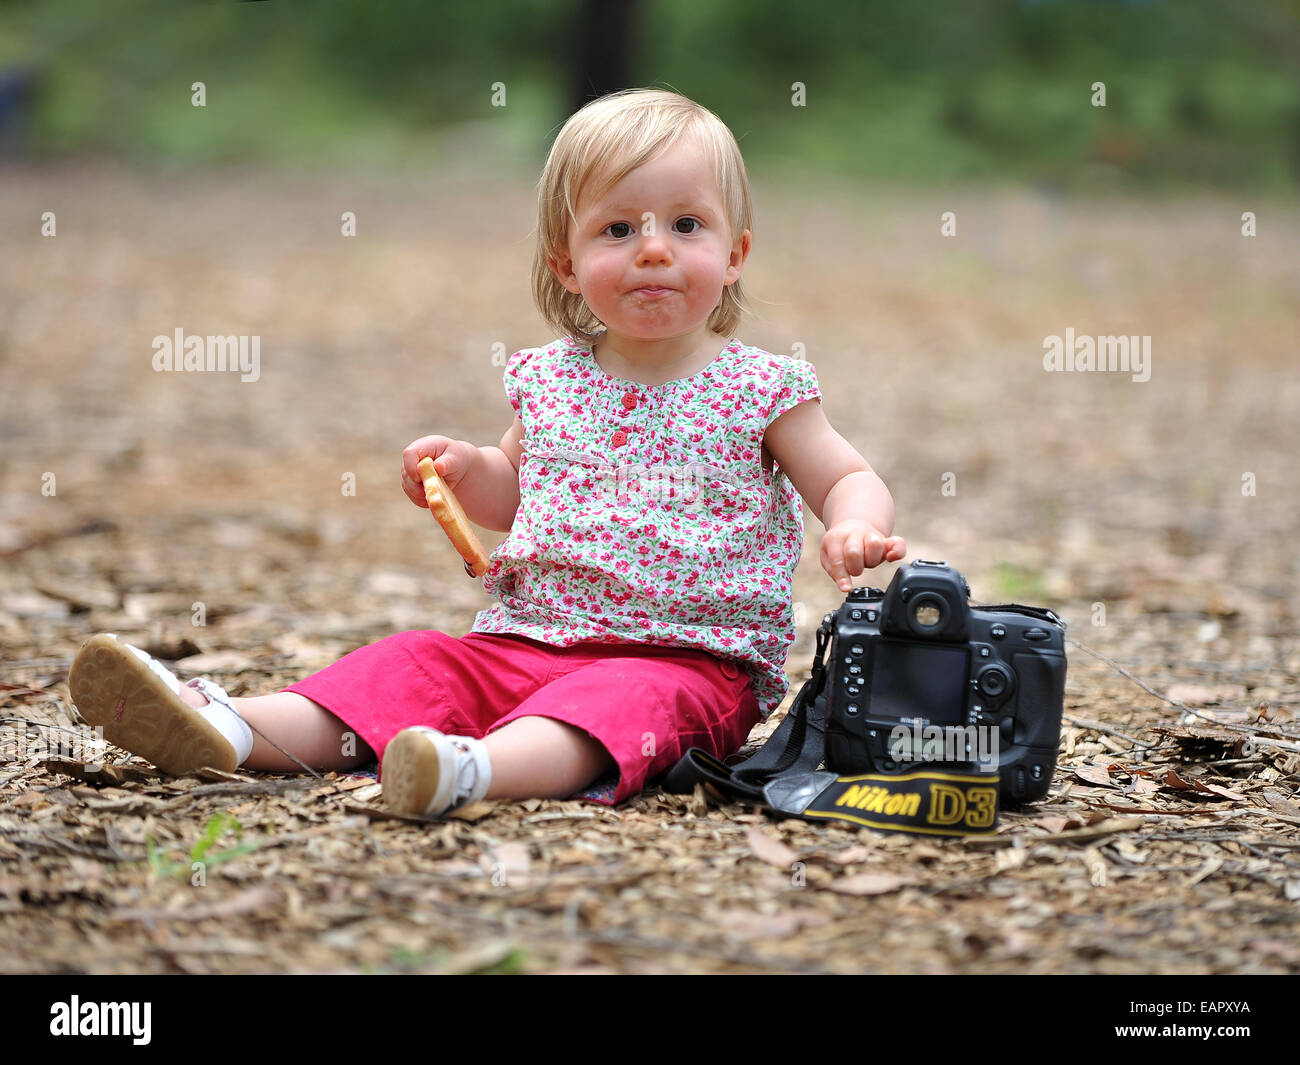 A young 1yr old girl trying out her dads Nikon D3 professional camera while out on a family walk in Melbourne, Australia. Stock Photo